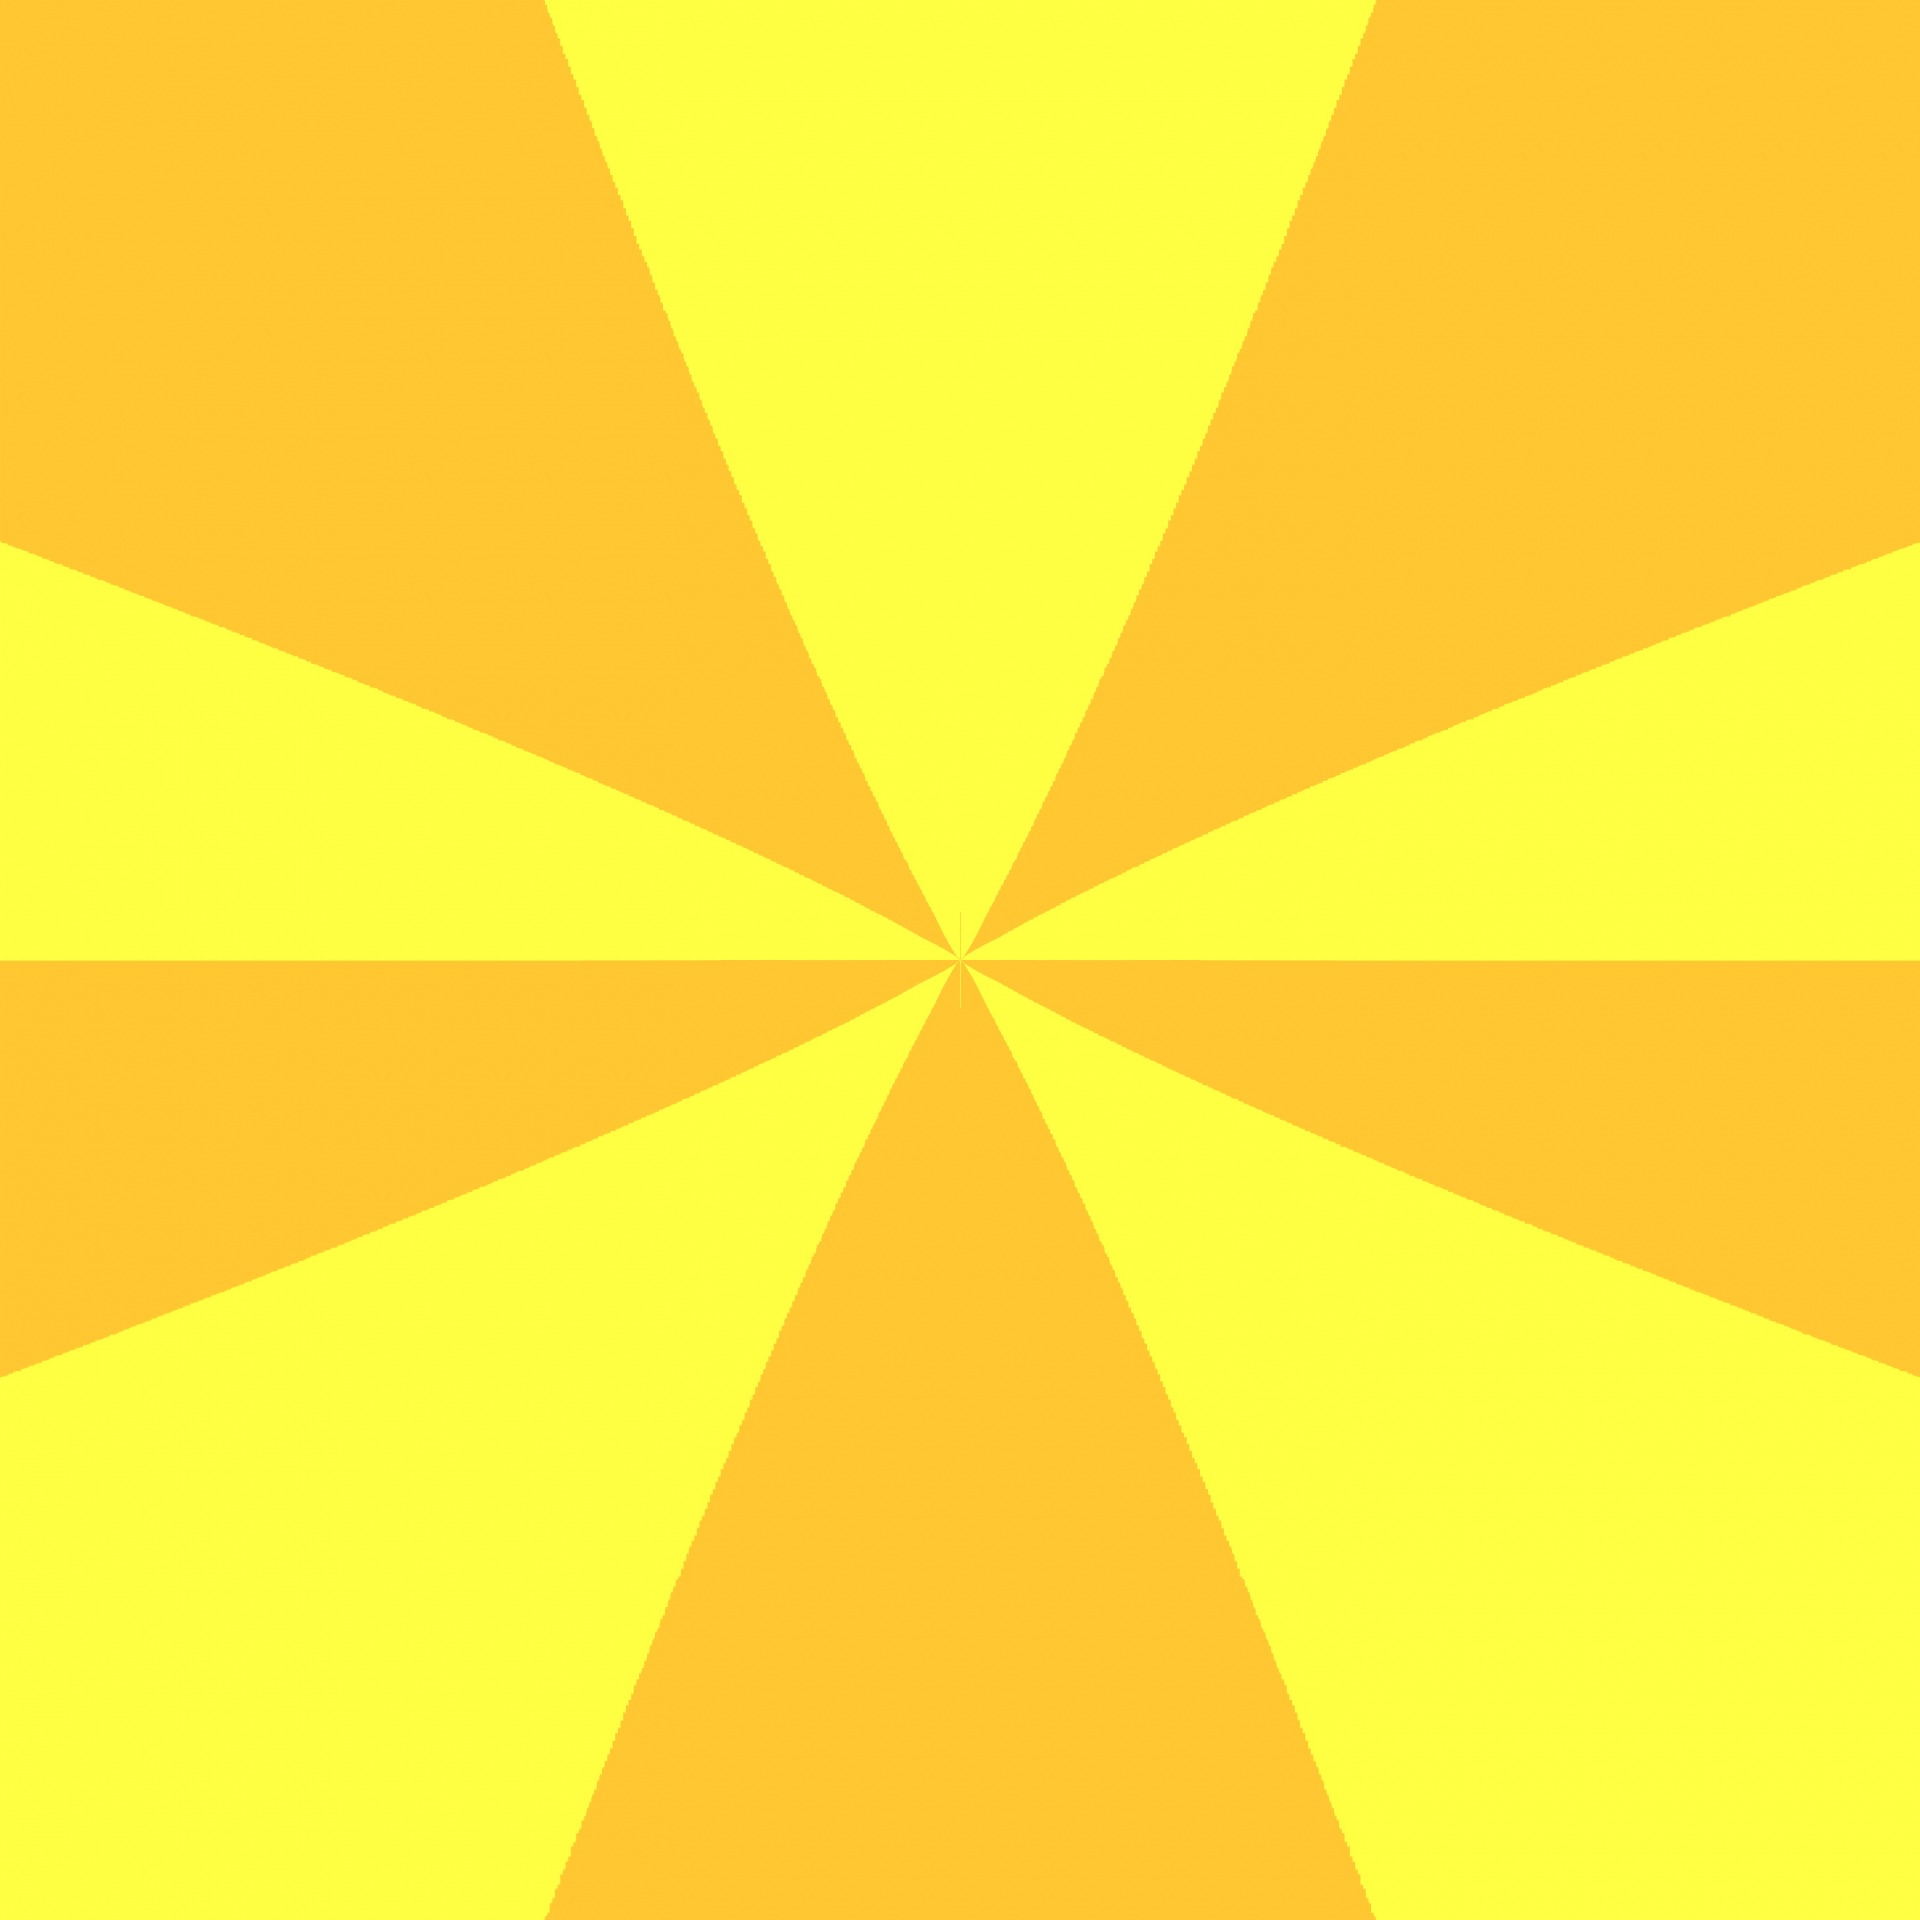 High Quality Yellow Background Blank Meme Template